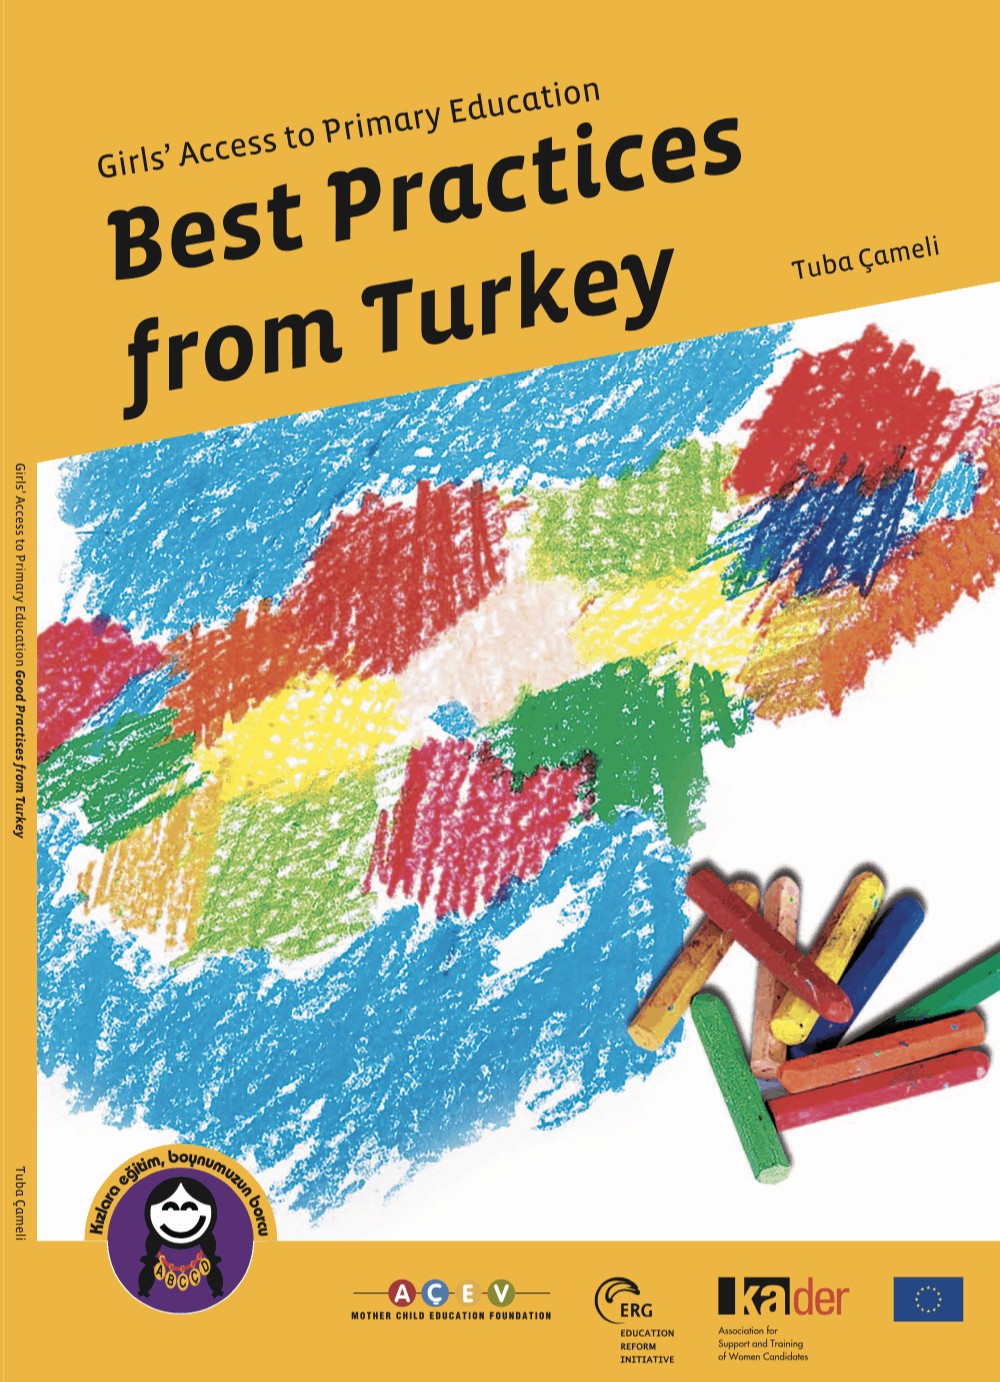 Girls’ Access to Primary Education: Best Practices from Turkey